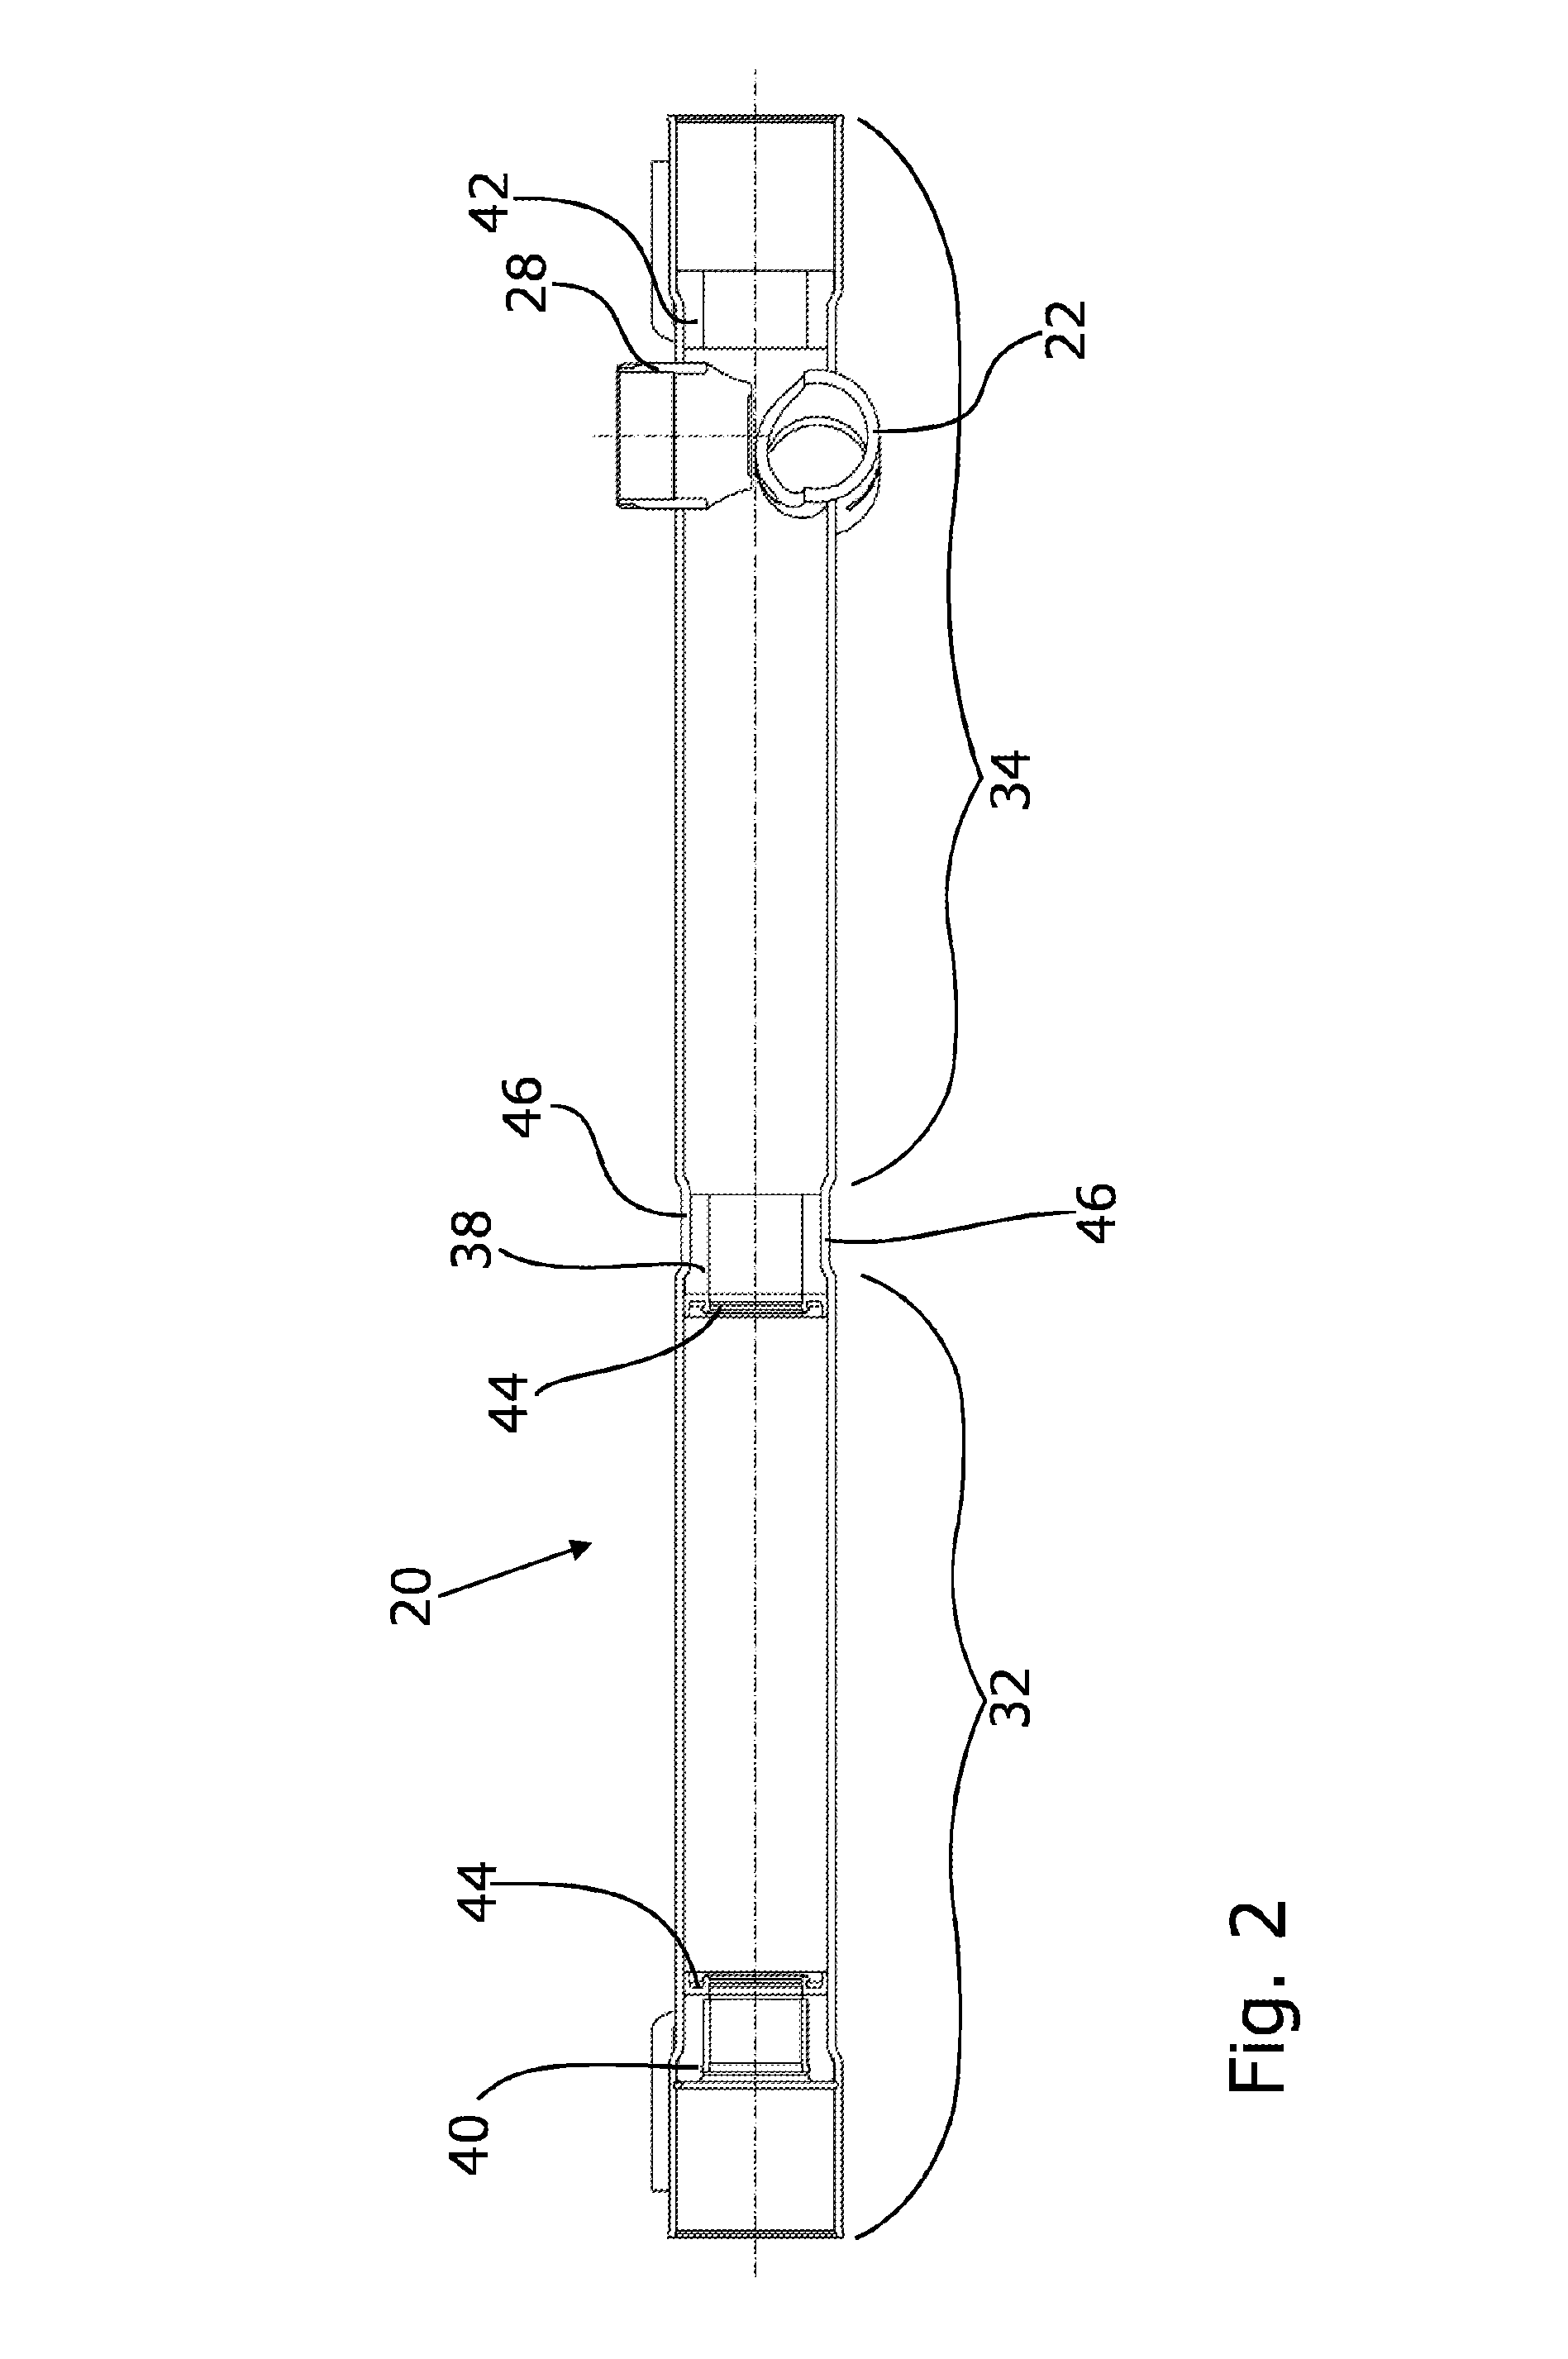 Method for attaching a supporting bearing in a steering rack housing for a power steering system